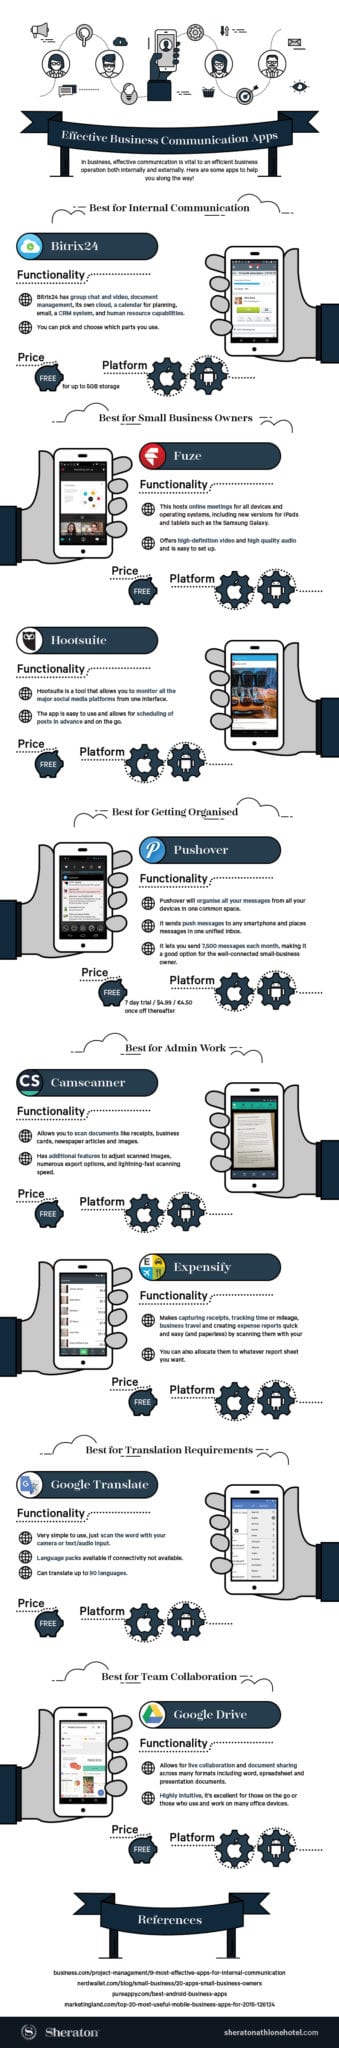 Effective Business Communication Apps Infographic